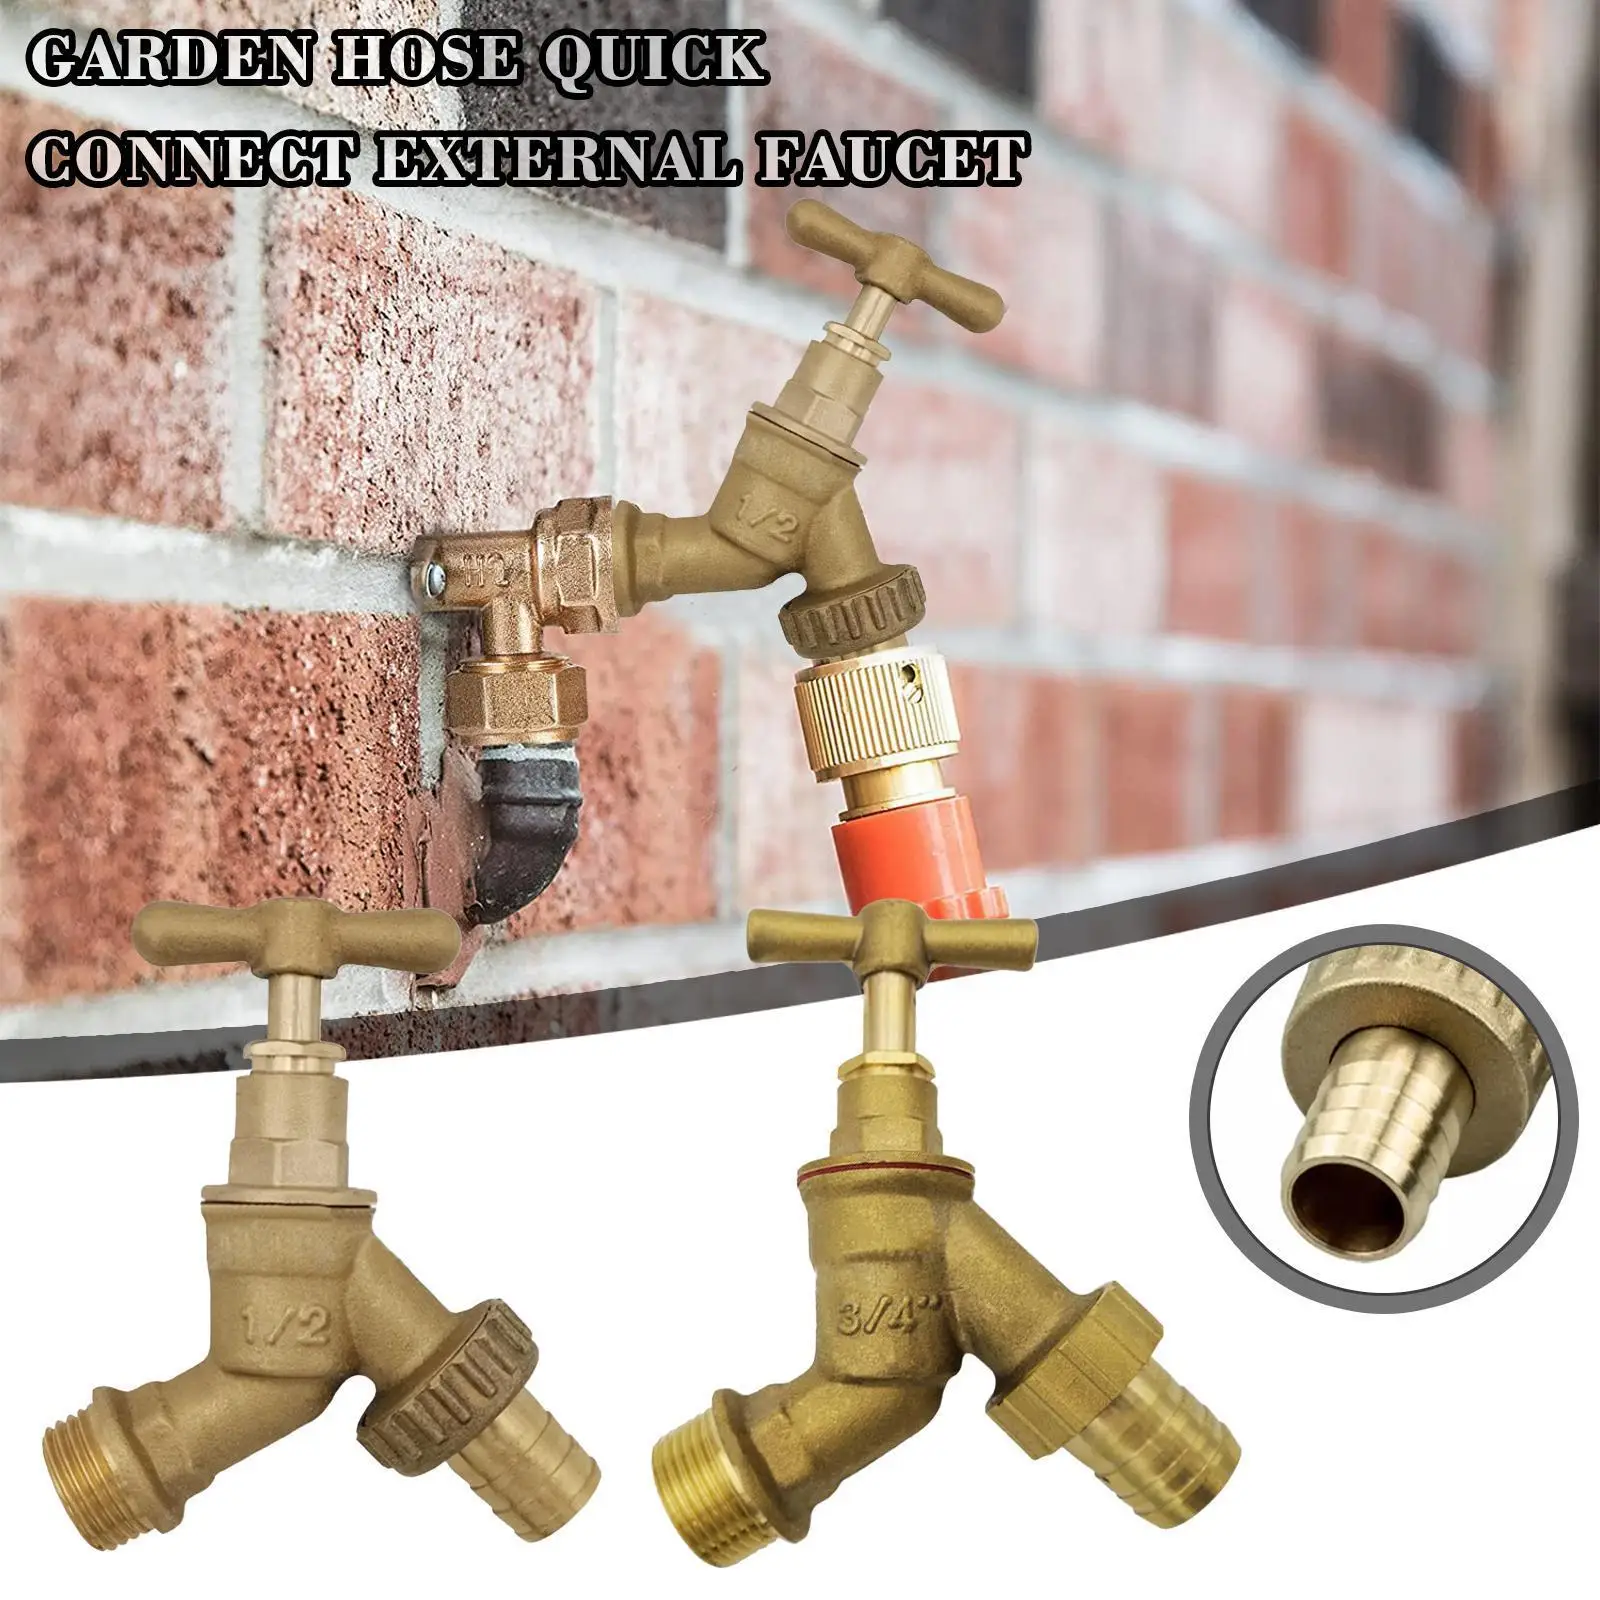 

Brass Forged Slow Open British Washing Machine Water Quick Garden Hose Connect Faucet Faucet R0d4